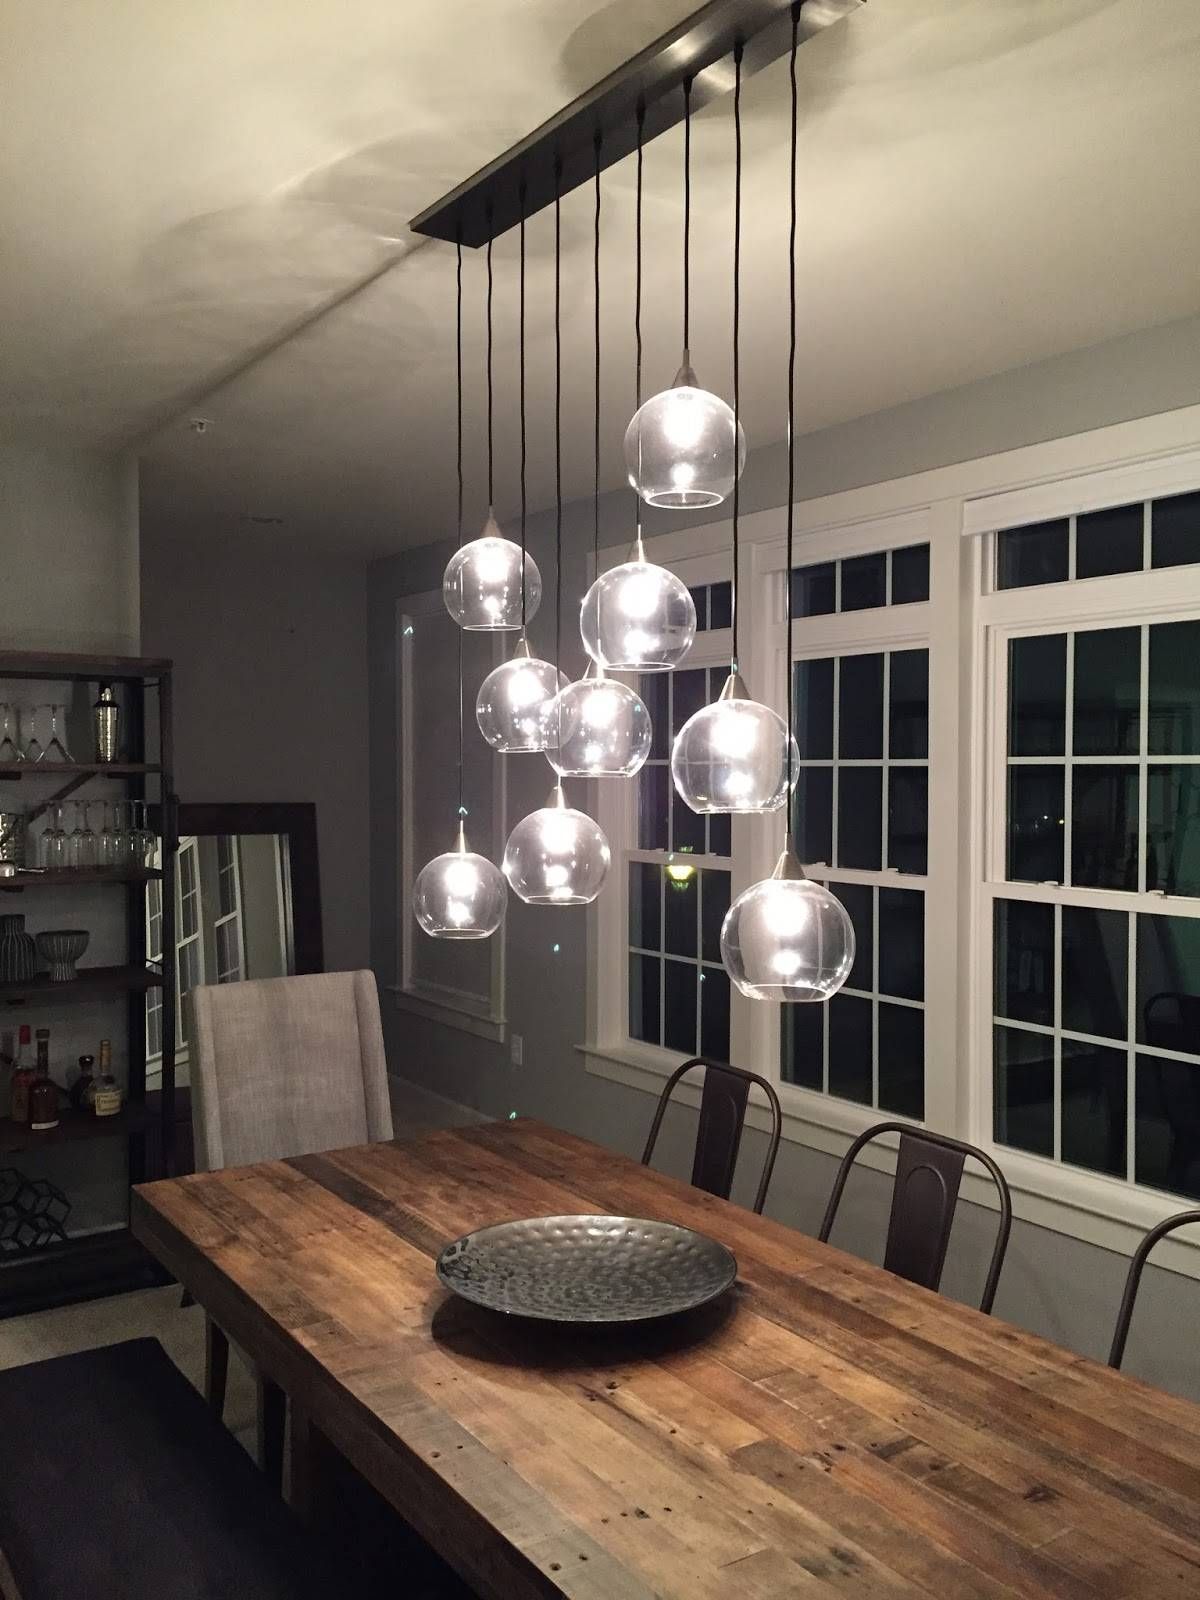 Whats New? Some Progress Finally! | Building Our Nvhomes Andrew Throughout Cb2 Pendant Lights Fixtures (View 11 of 15)